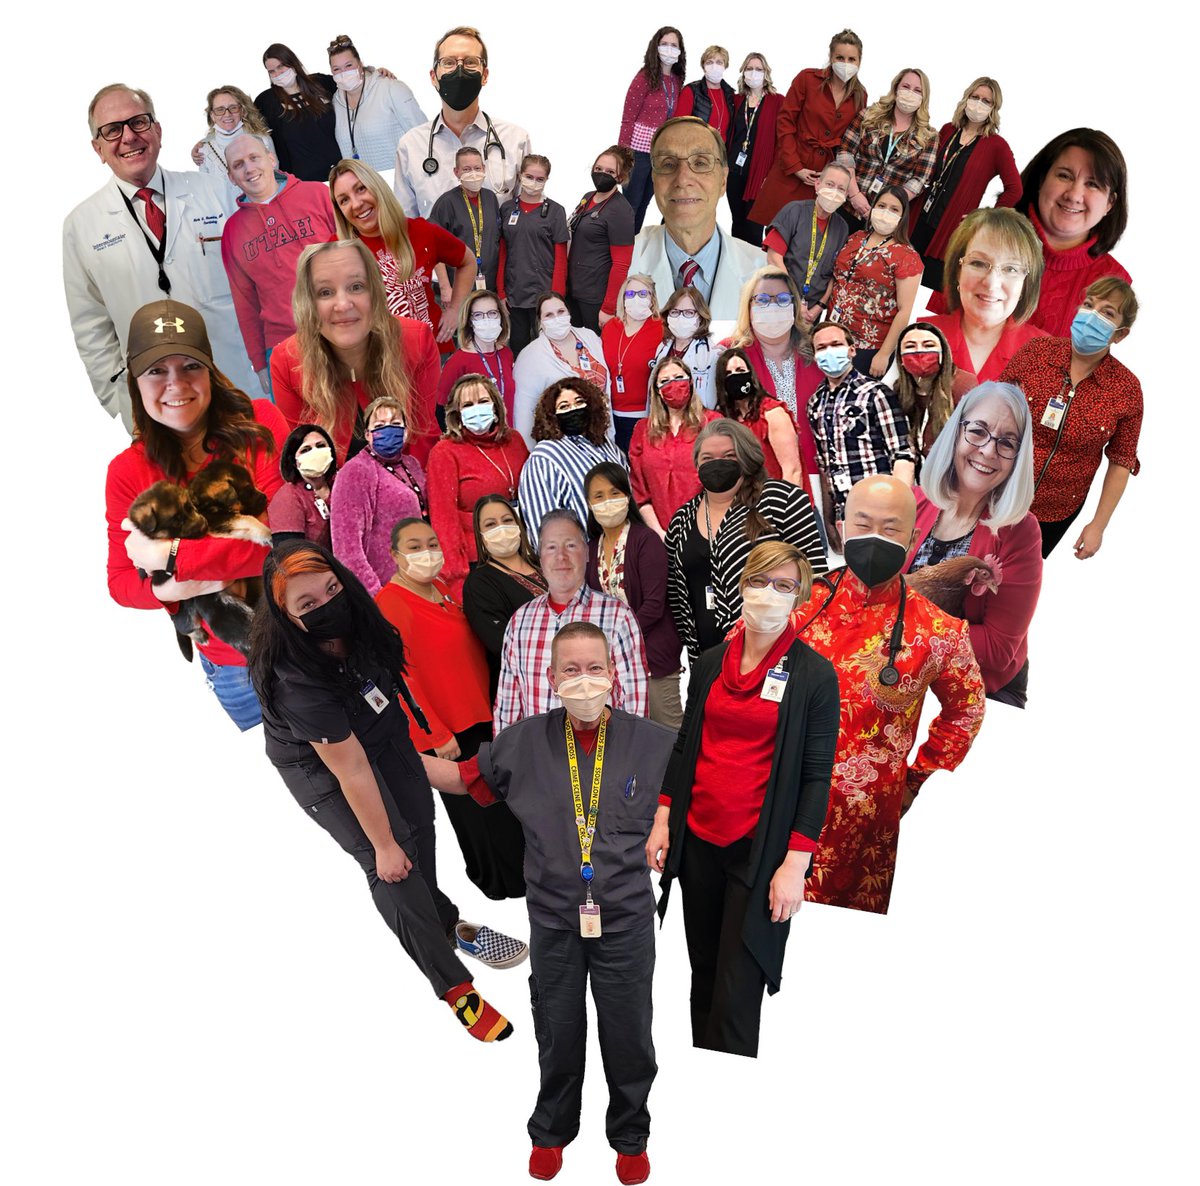 What's 'TEAM'? This is MY @Intermountain Heart and Vascular Team. From outpt to inpt care, imaging/EKG, rehab, invasive/procedural services, to administrative support, etc. So proud to #GoRedForWomen for #HeartMonth with these amazing people. #WearRedDay